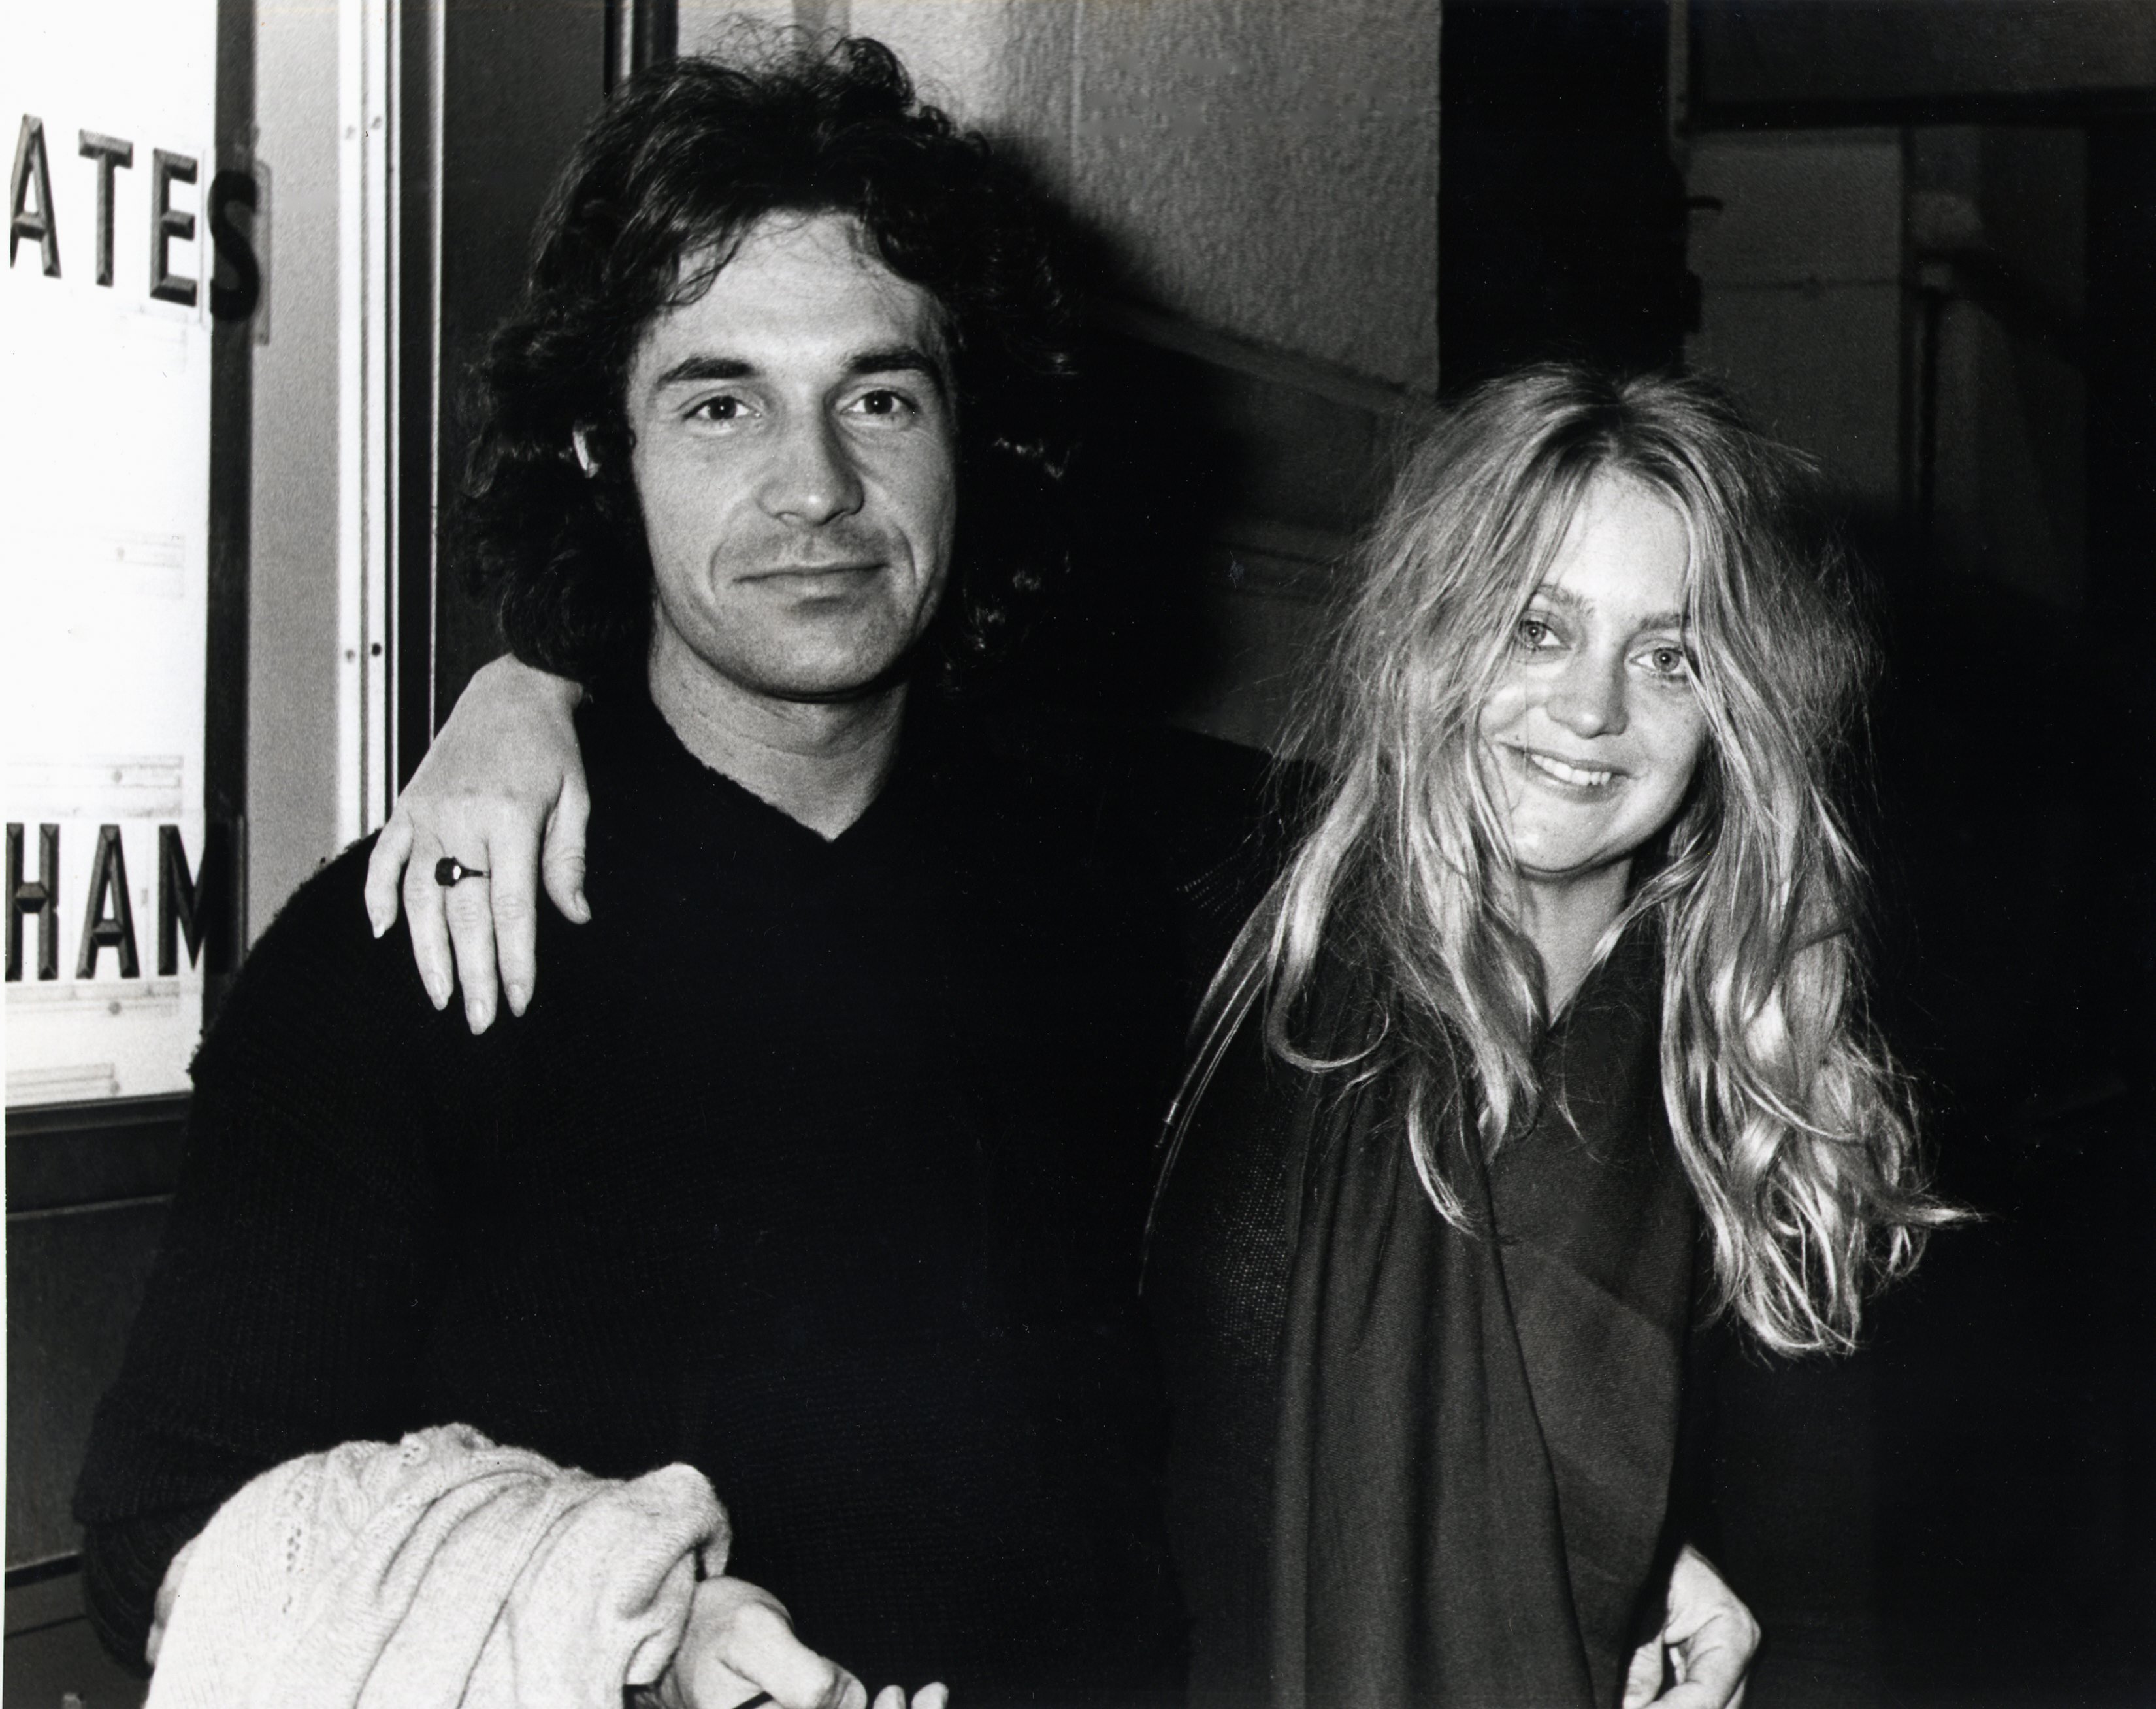 Monochrome photo of Bill Hudson and Goldie Hawn on November 20, 1976. | Source: Getty Images